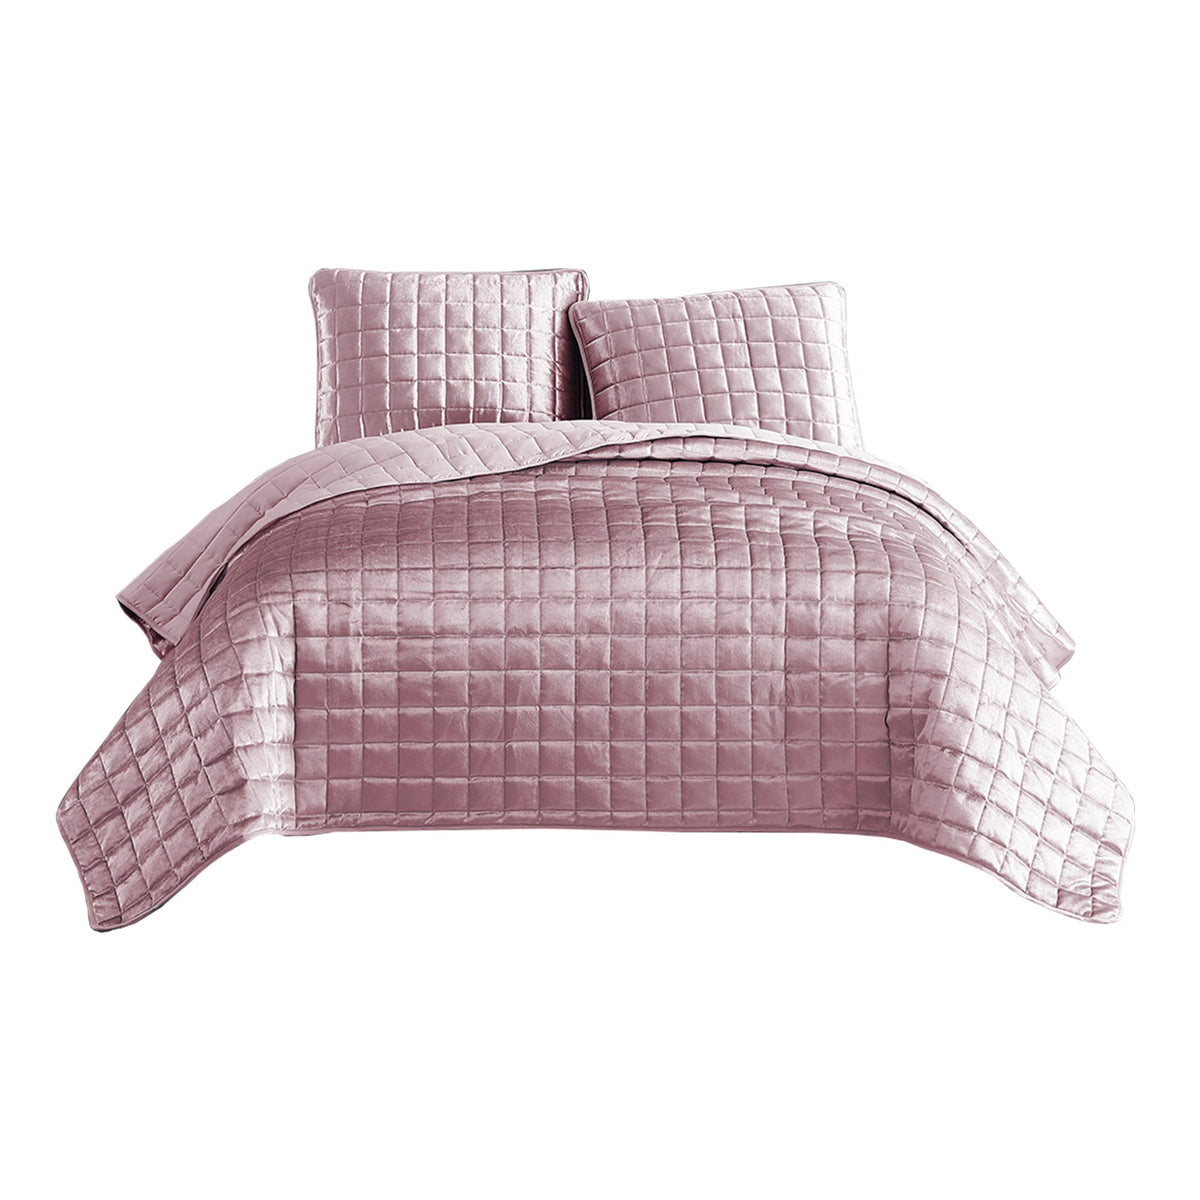 3 Piece King Size Coverlet Set with Stitched Square Pattern, Pink - BM225231